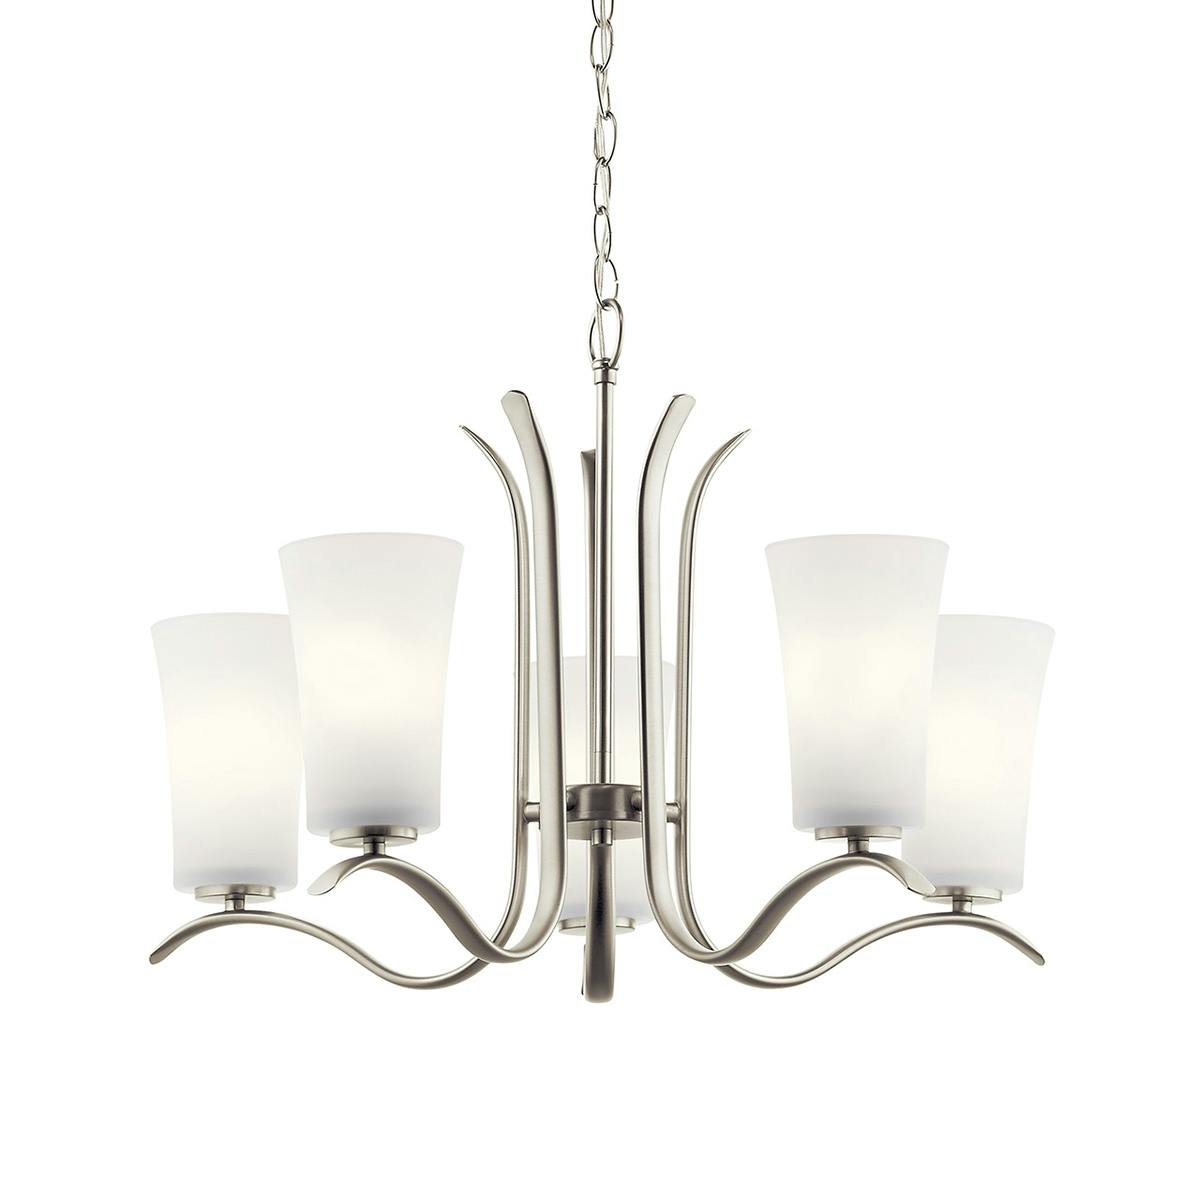 Armida 18" Chandelier in a Nickel finish without the canopy on a white background